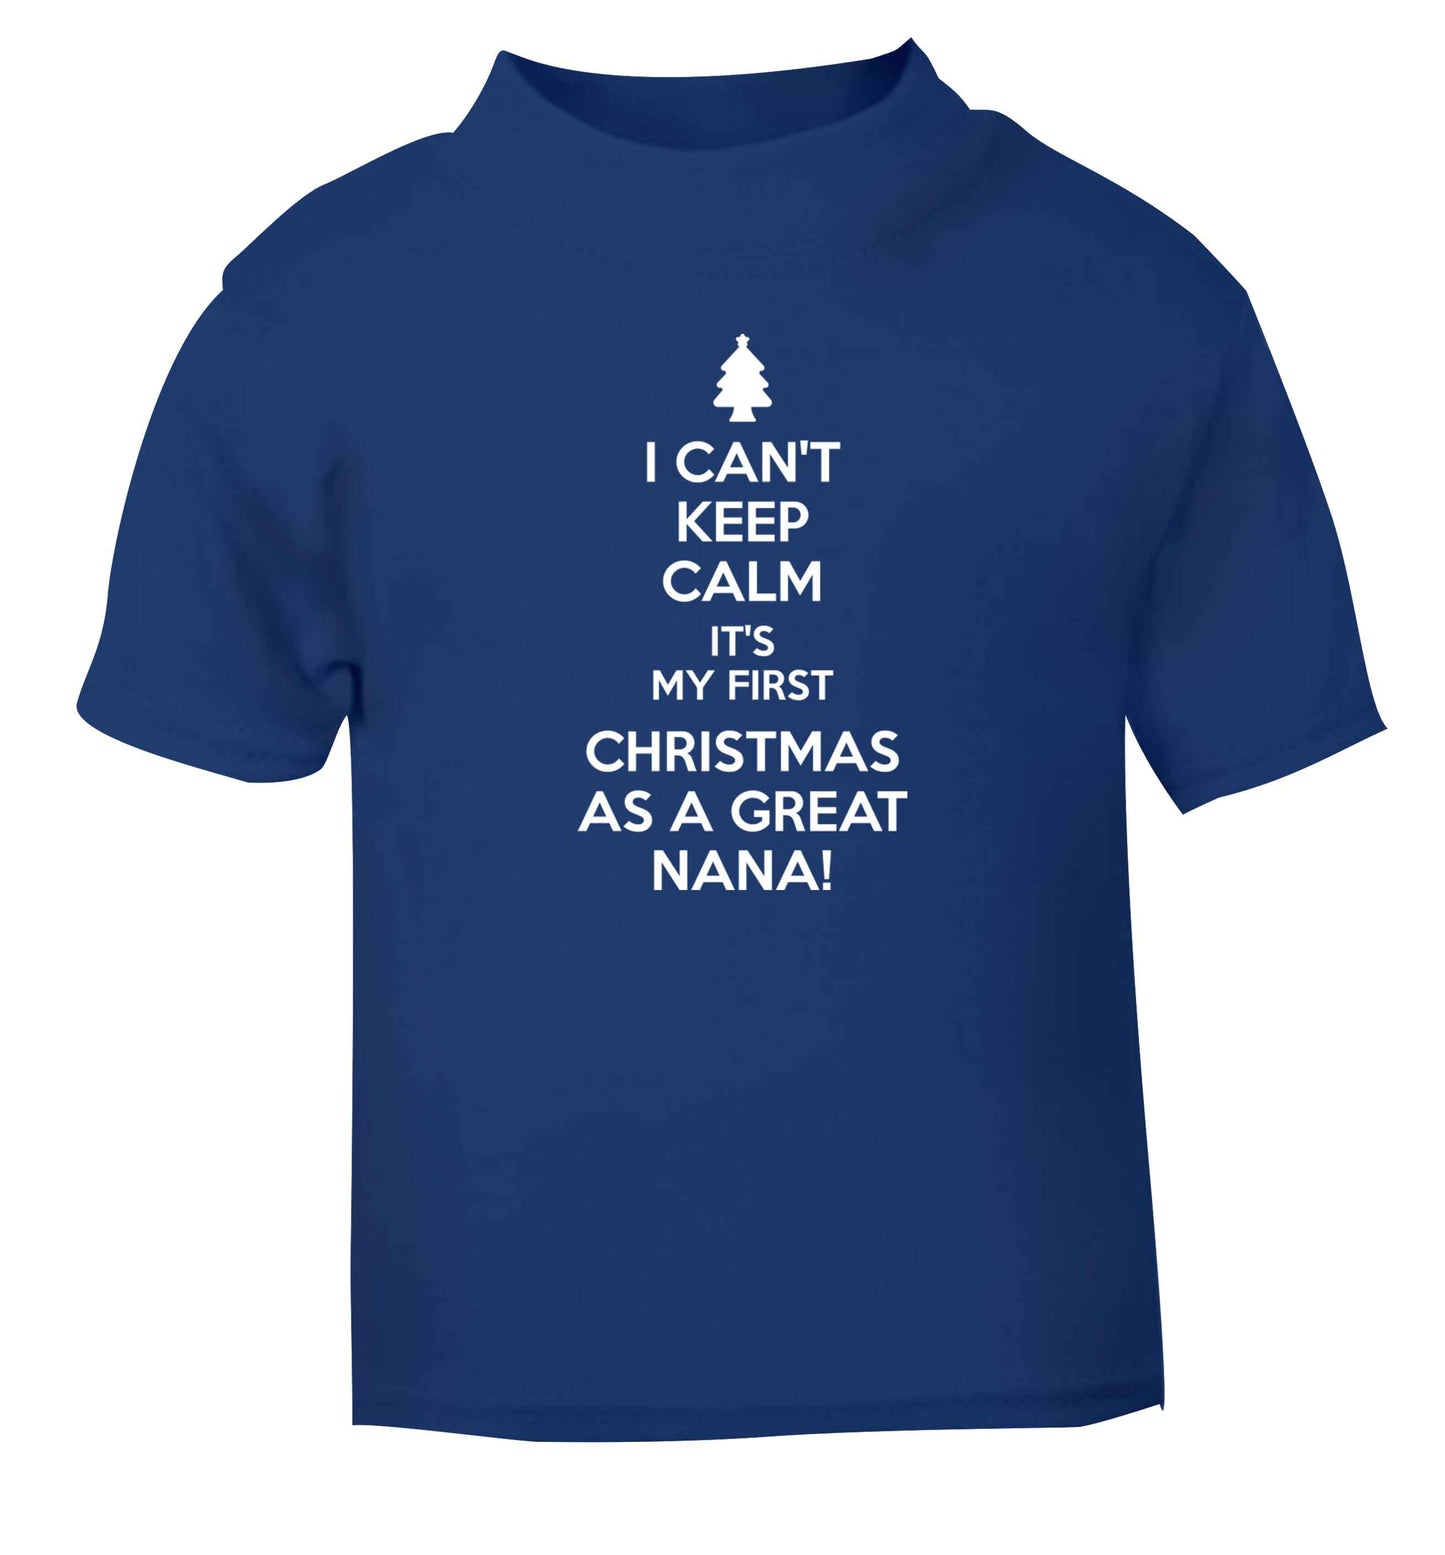 I can't keep calm it's my first Christmas as a great nana! blue Baby Toddler Tshirt 2 Years